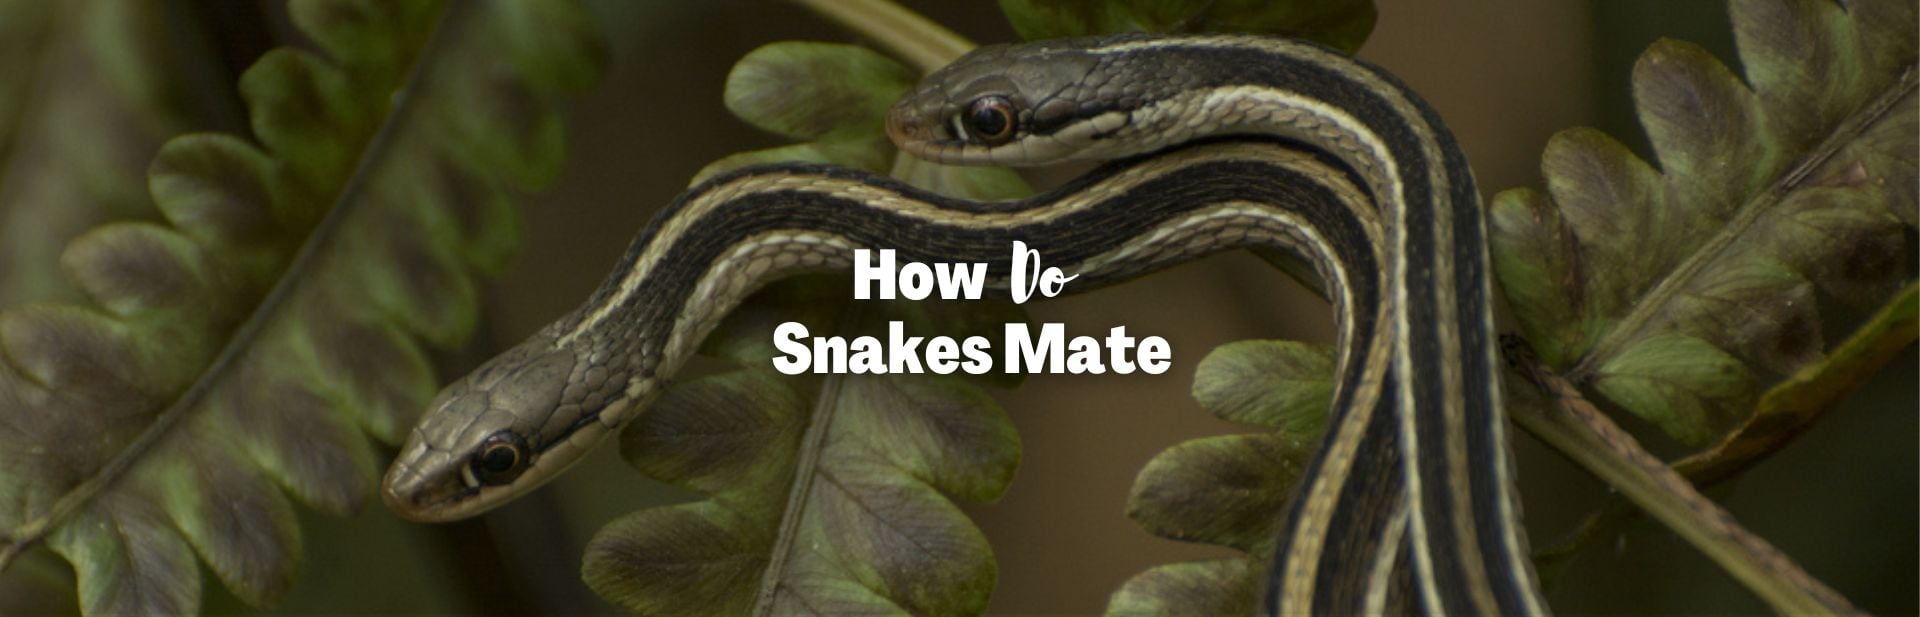 How Do Snakes Mate? An Exploration of Their Unique Reproductive Methods